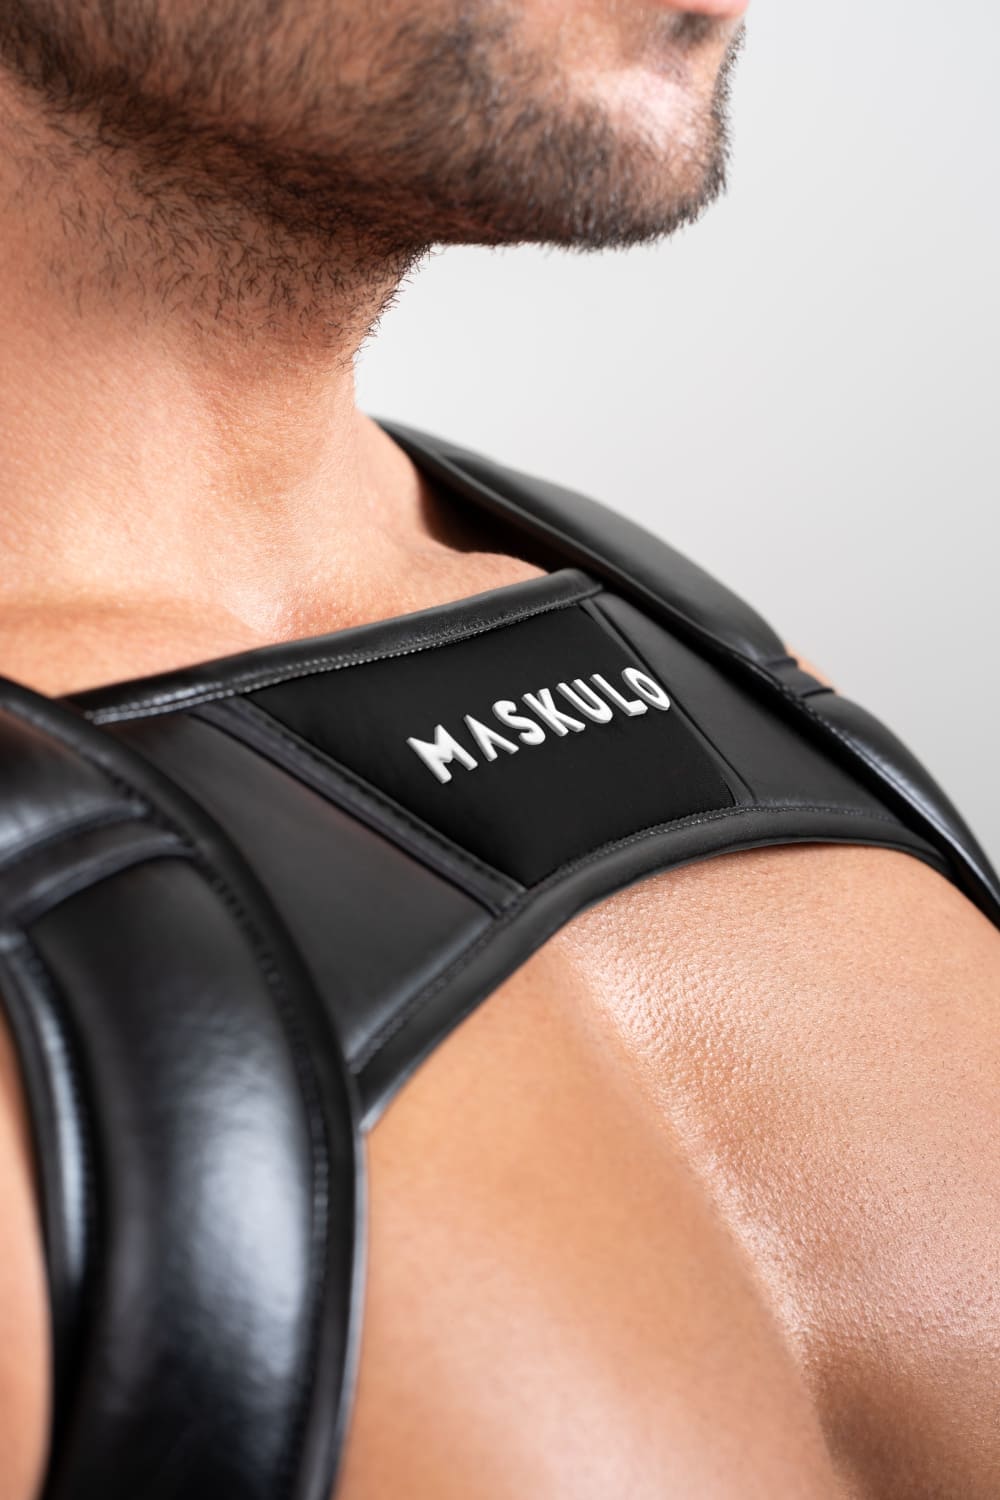 Body Harness with Push-up Effect. Black